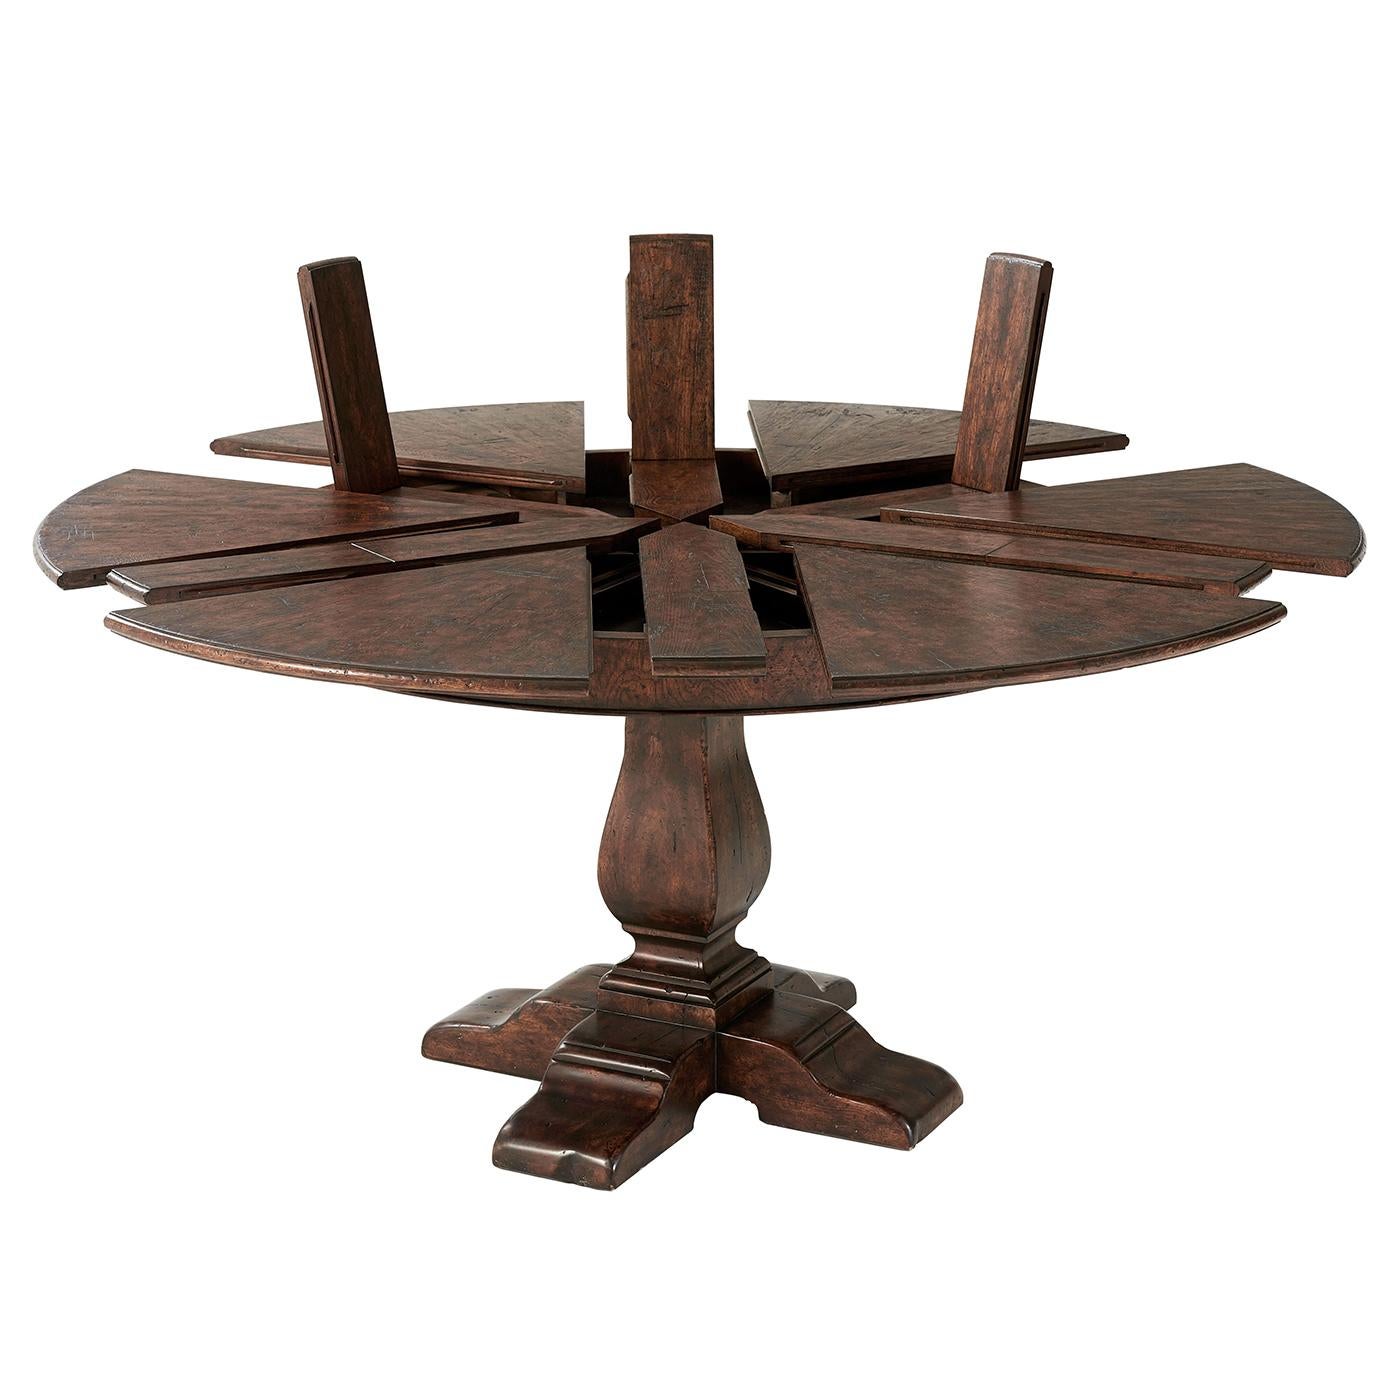 Italian Renaissance style Jupe extension dining table. A reclaimed oak and chestnut burl restored circular extending dining table, the segmented top opening to reveal six self-storing fold out leaves above a plain frieze, on a vase column support